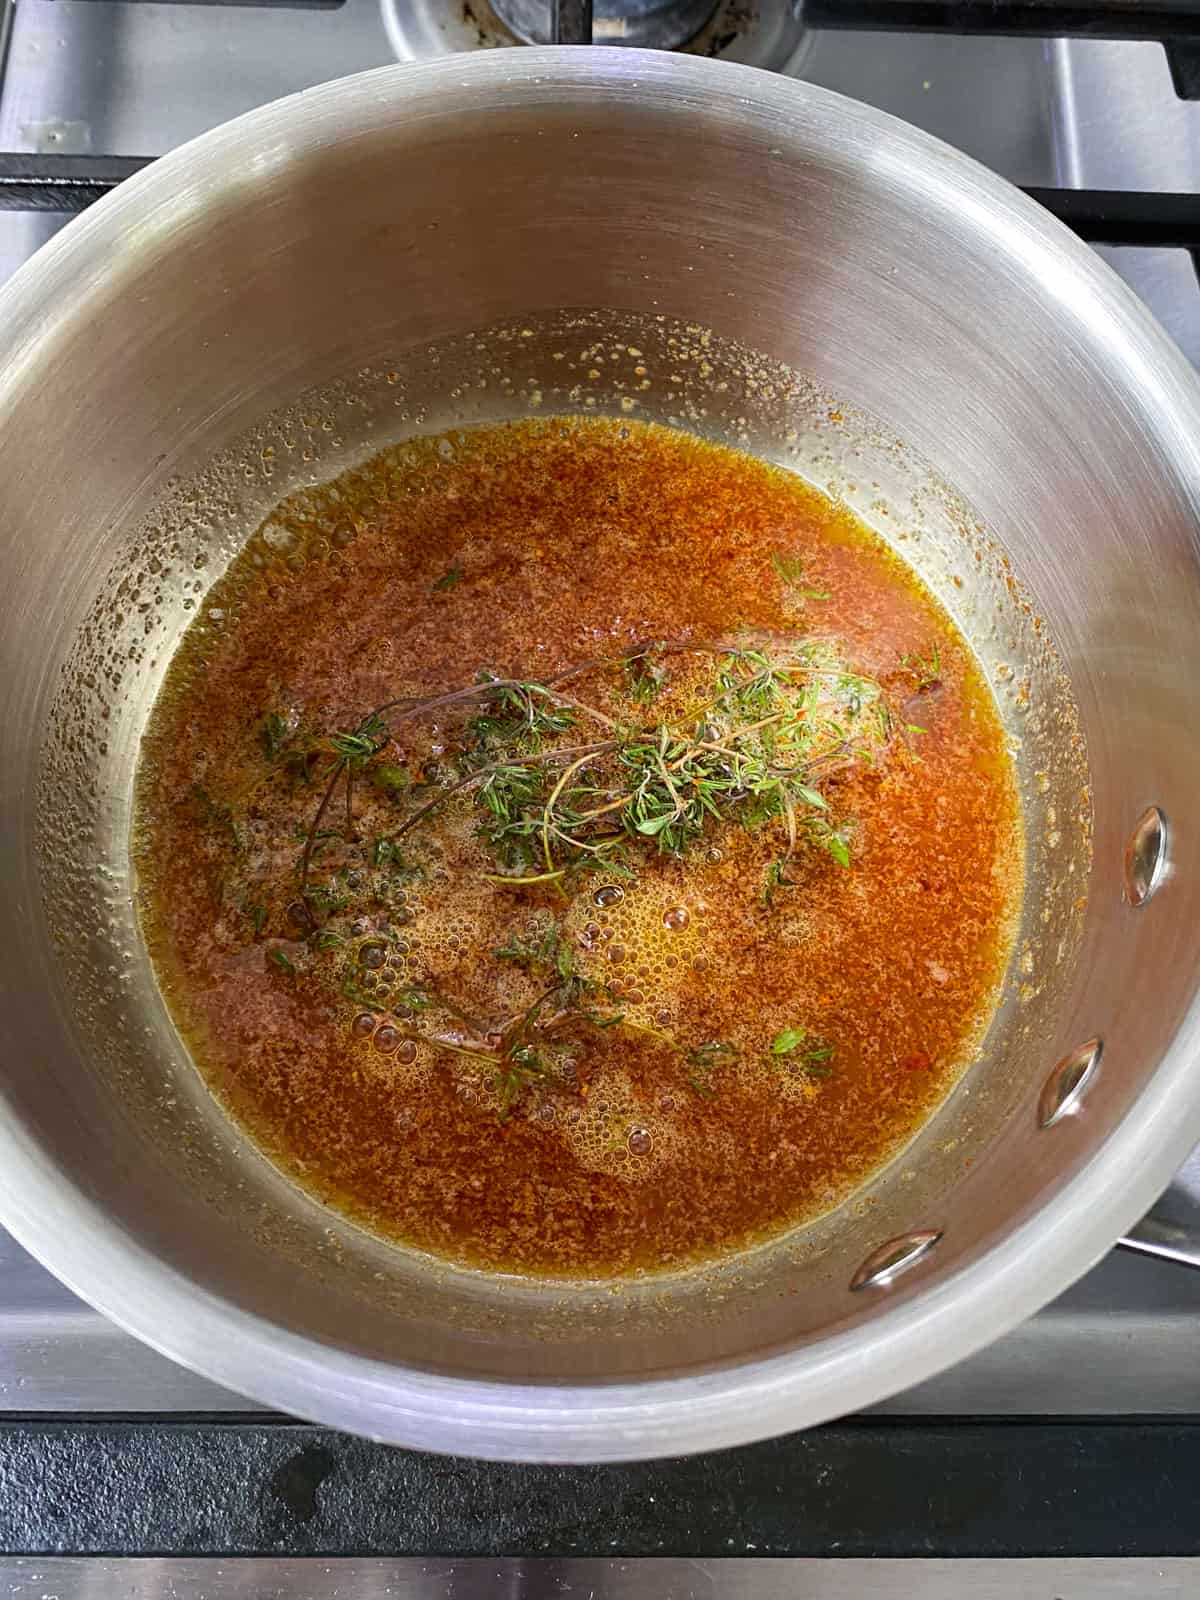 Melt the butter with fresh thyme sprogs and smoked paprika until the butter darkens into a deep rust color.